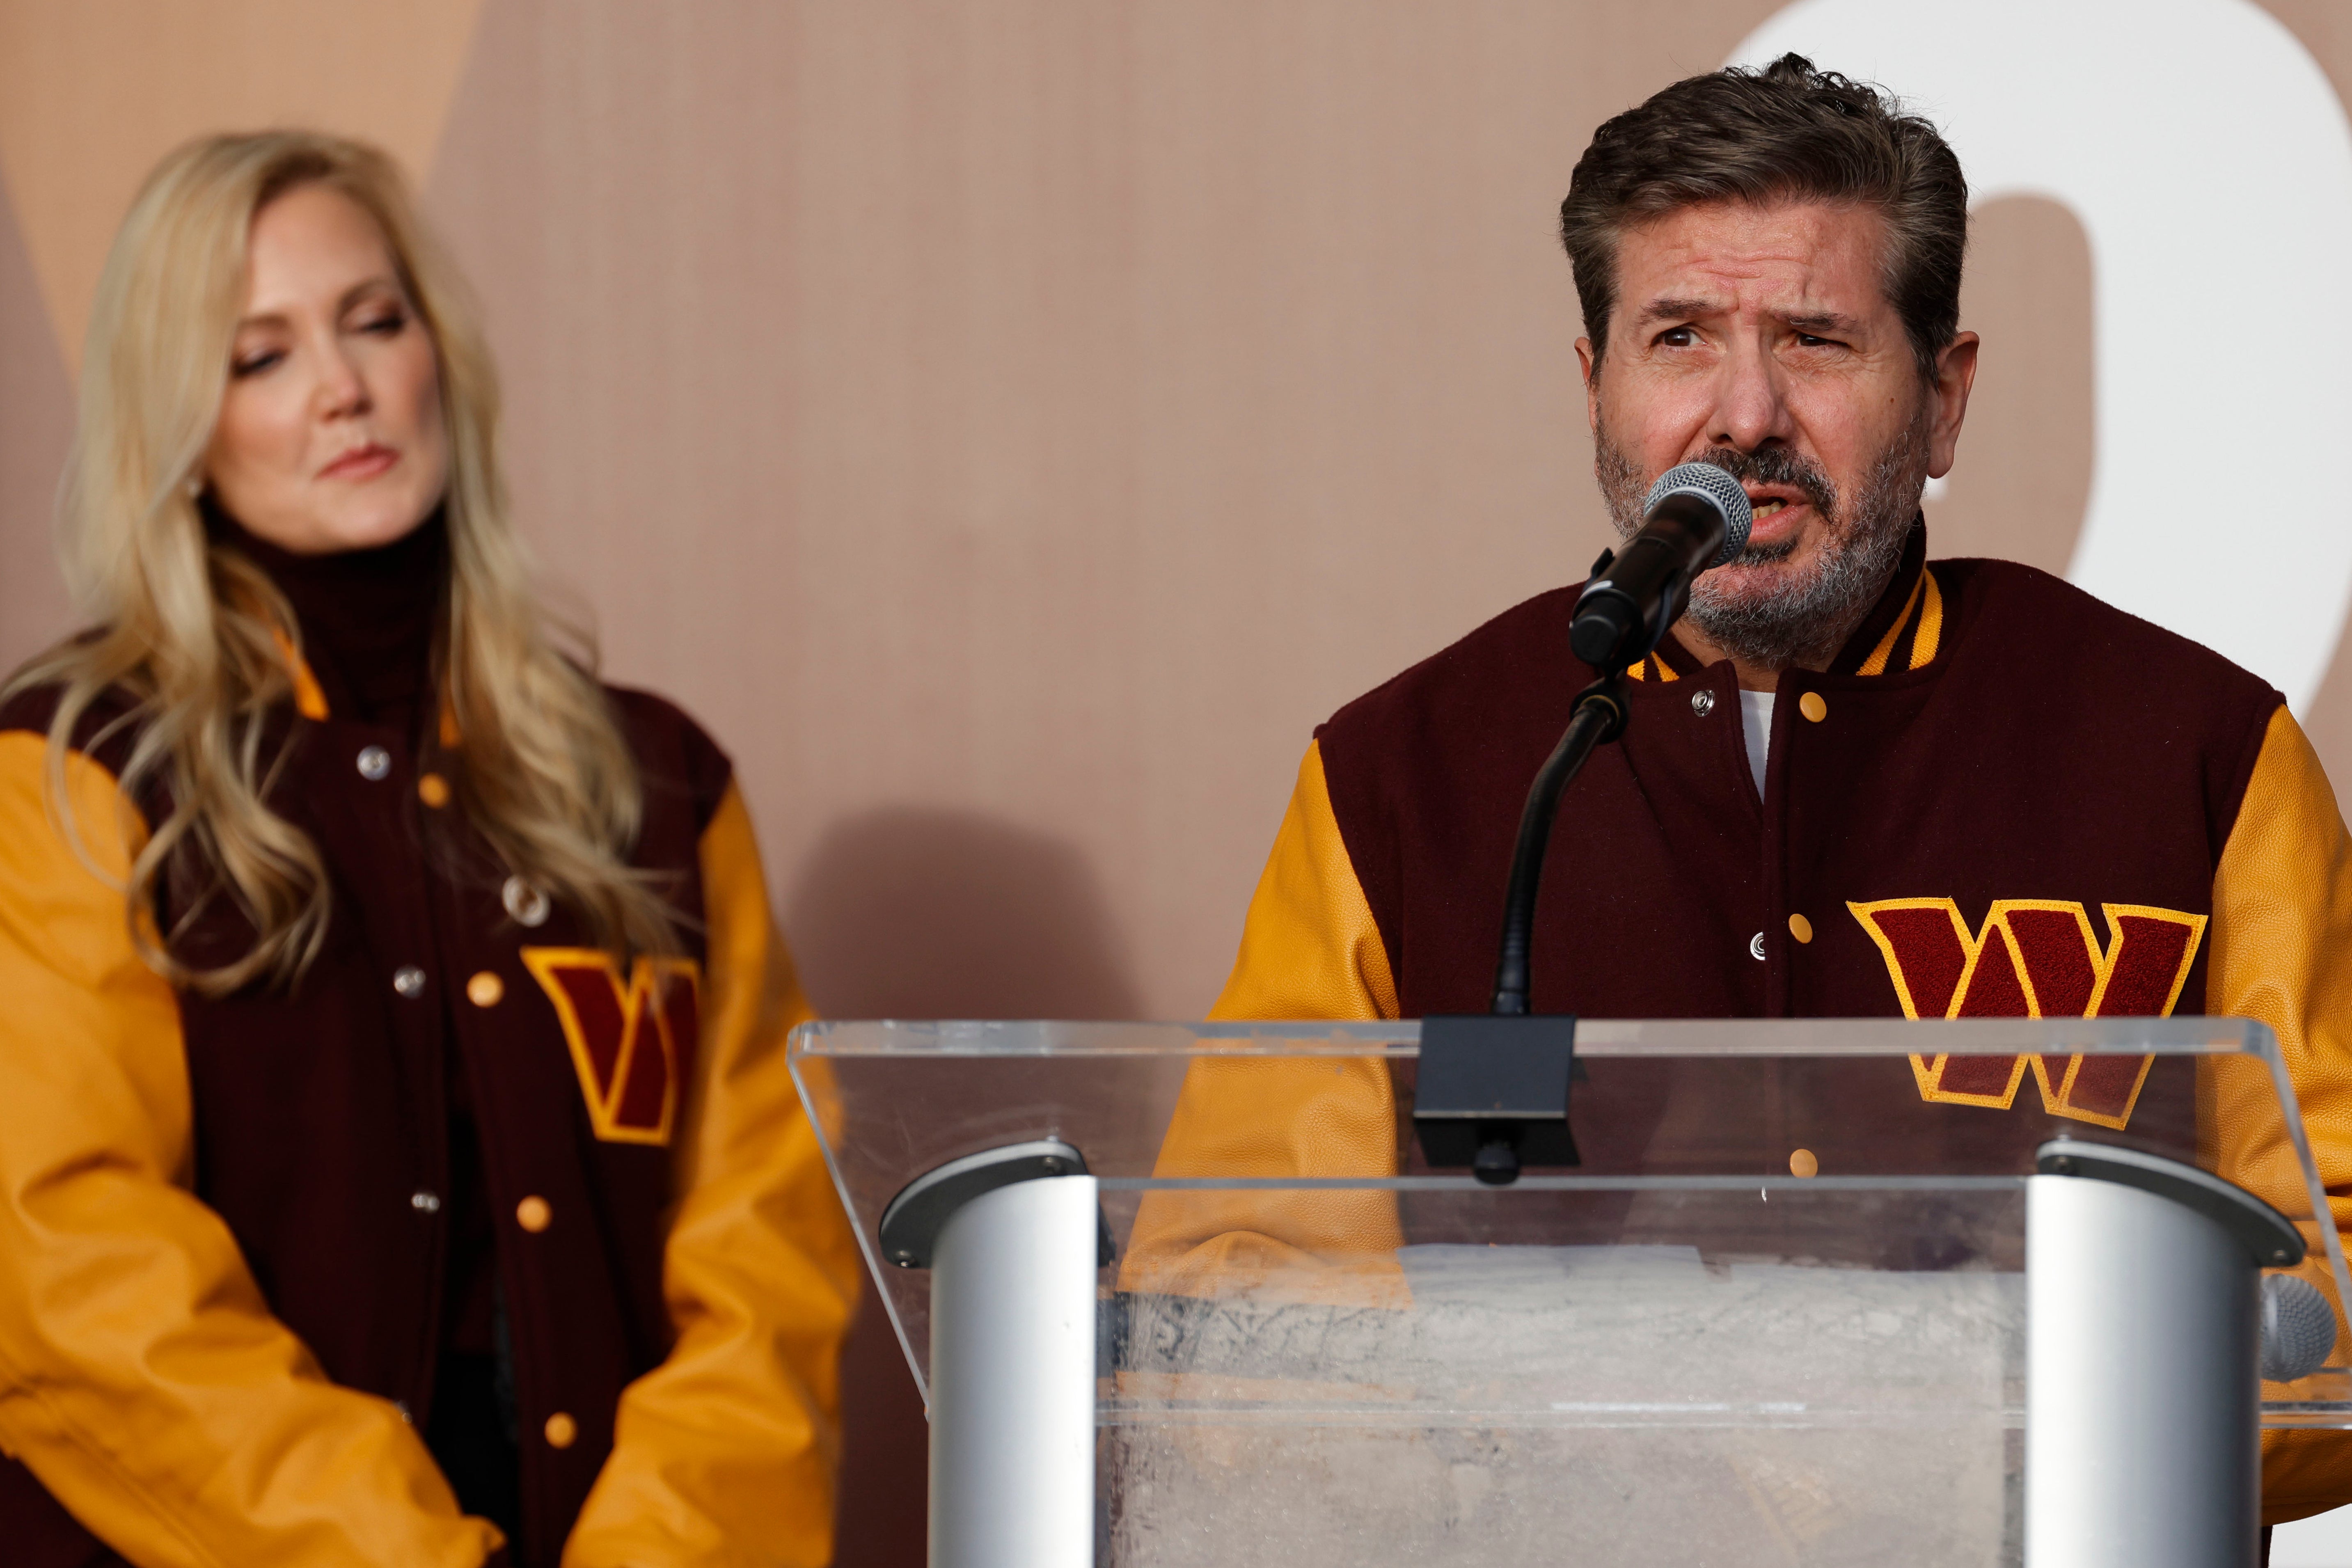 Dan Snyder, in a Washington Commanders jacket, speaks at a podium as his wife Tanya Snyder stands behind him in a matching jacket